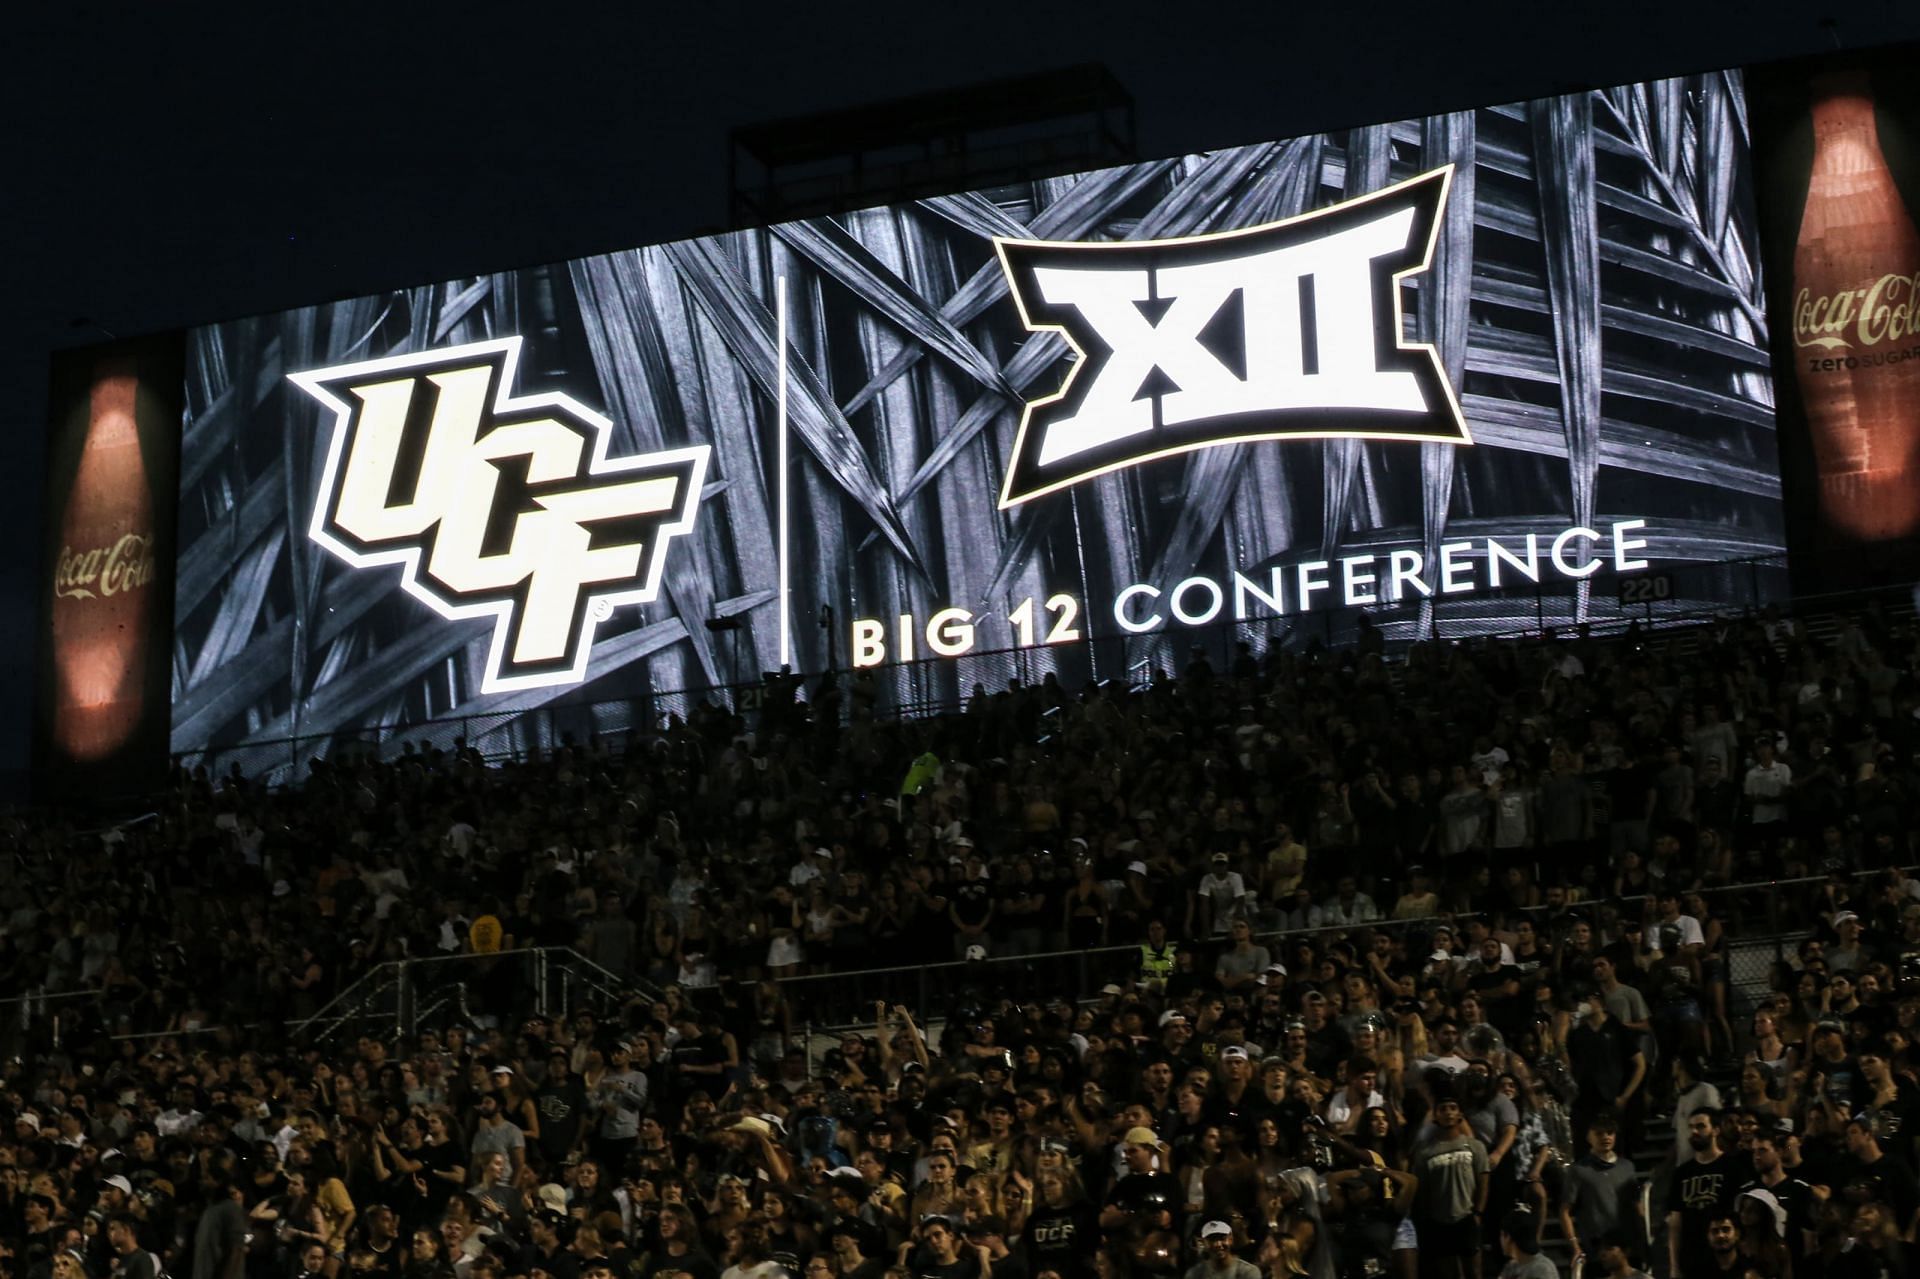 The UCF is set to join the Big 12